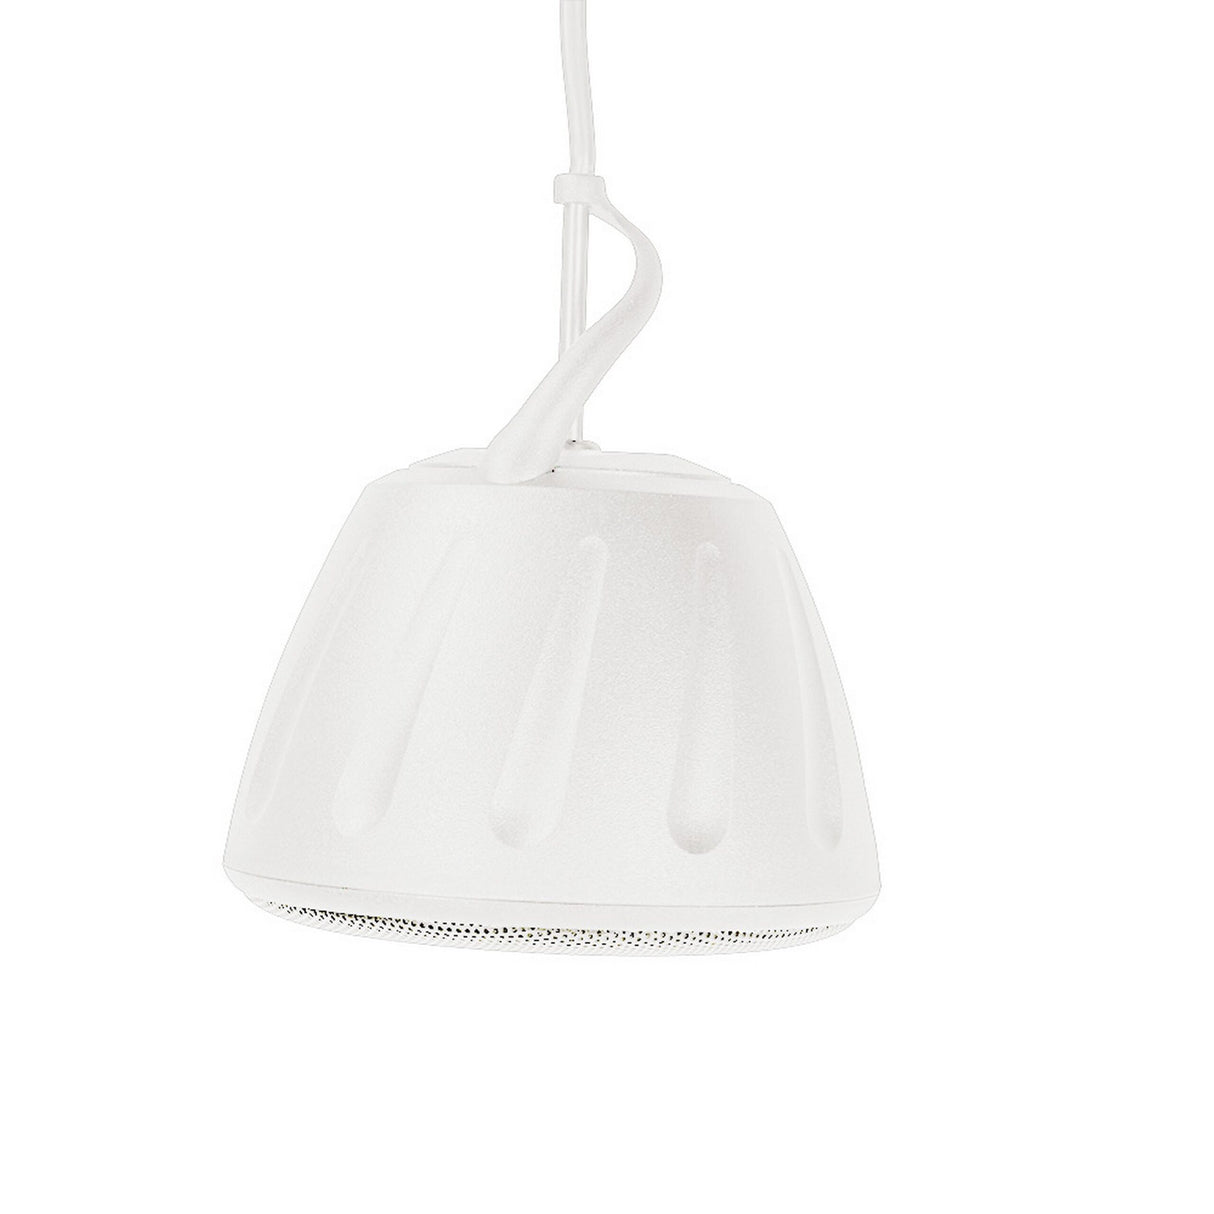 SoundTube RS31-EZ-T-WH 3-Inch Hanging Speaker, White with Transformer